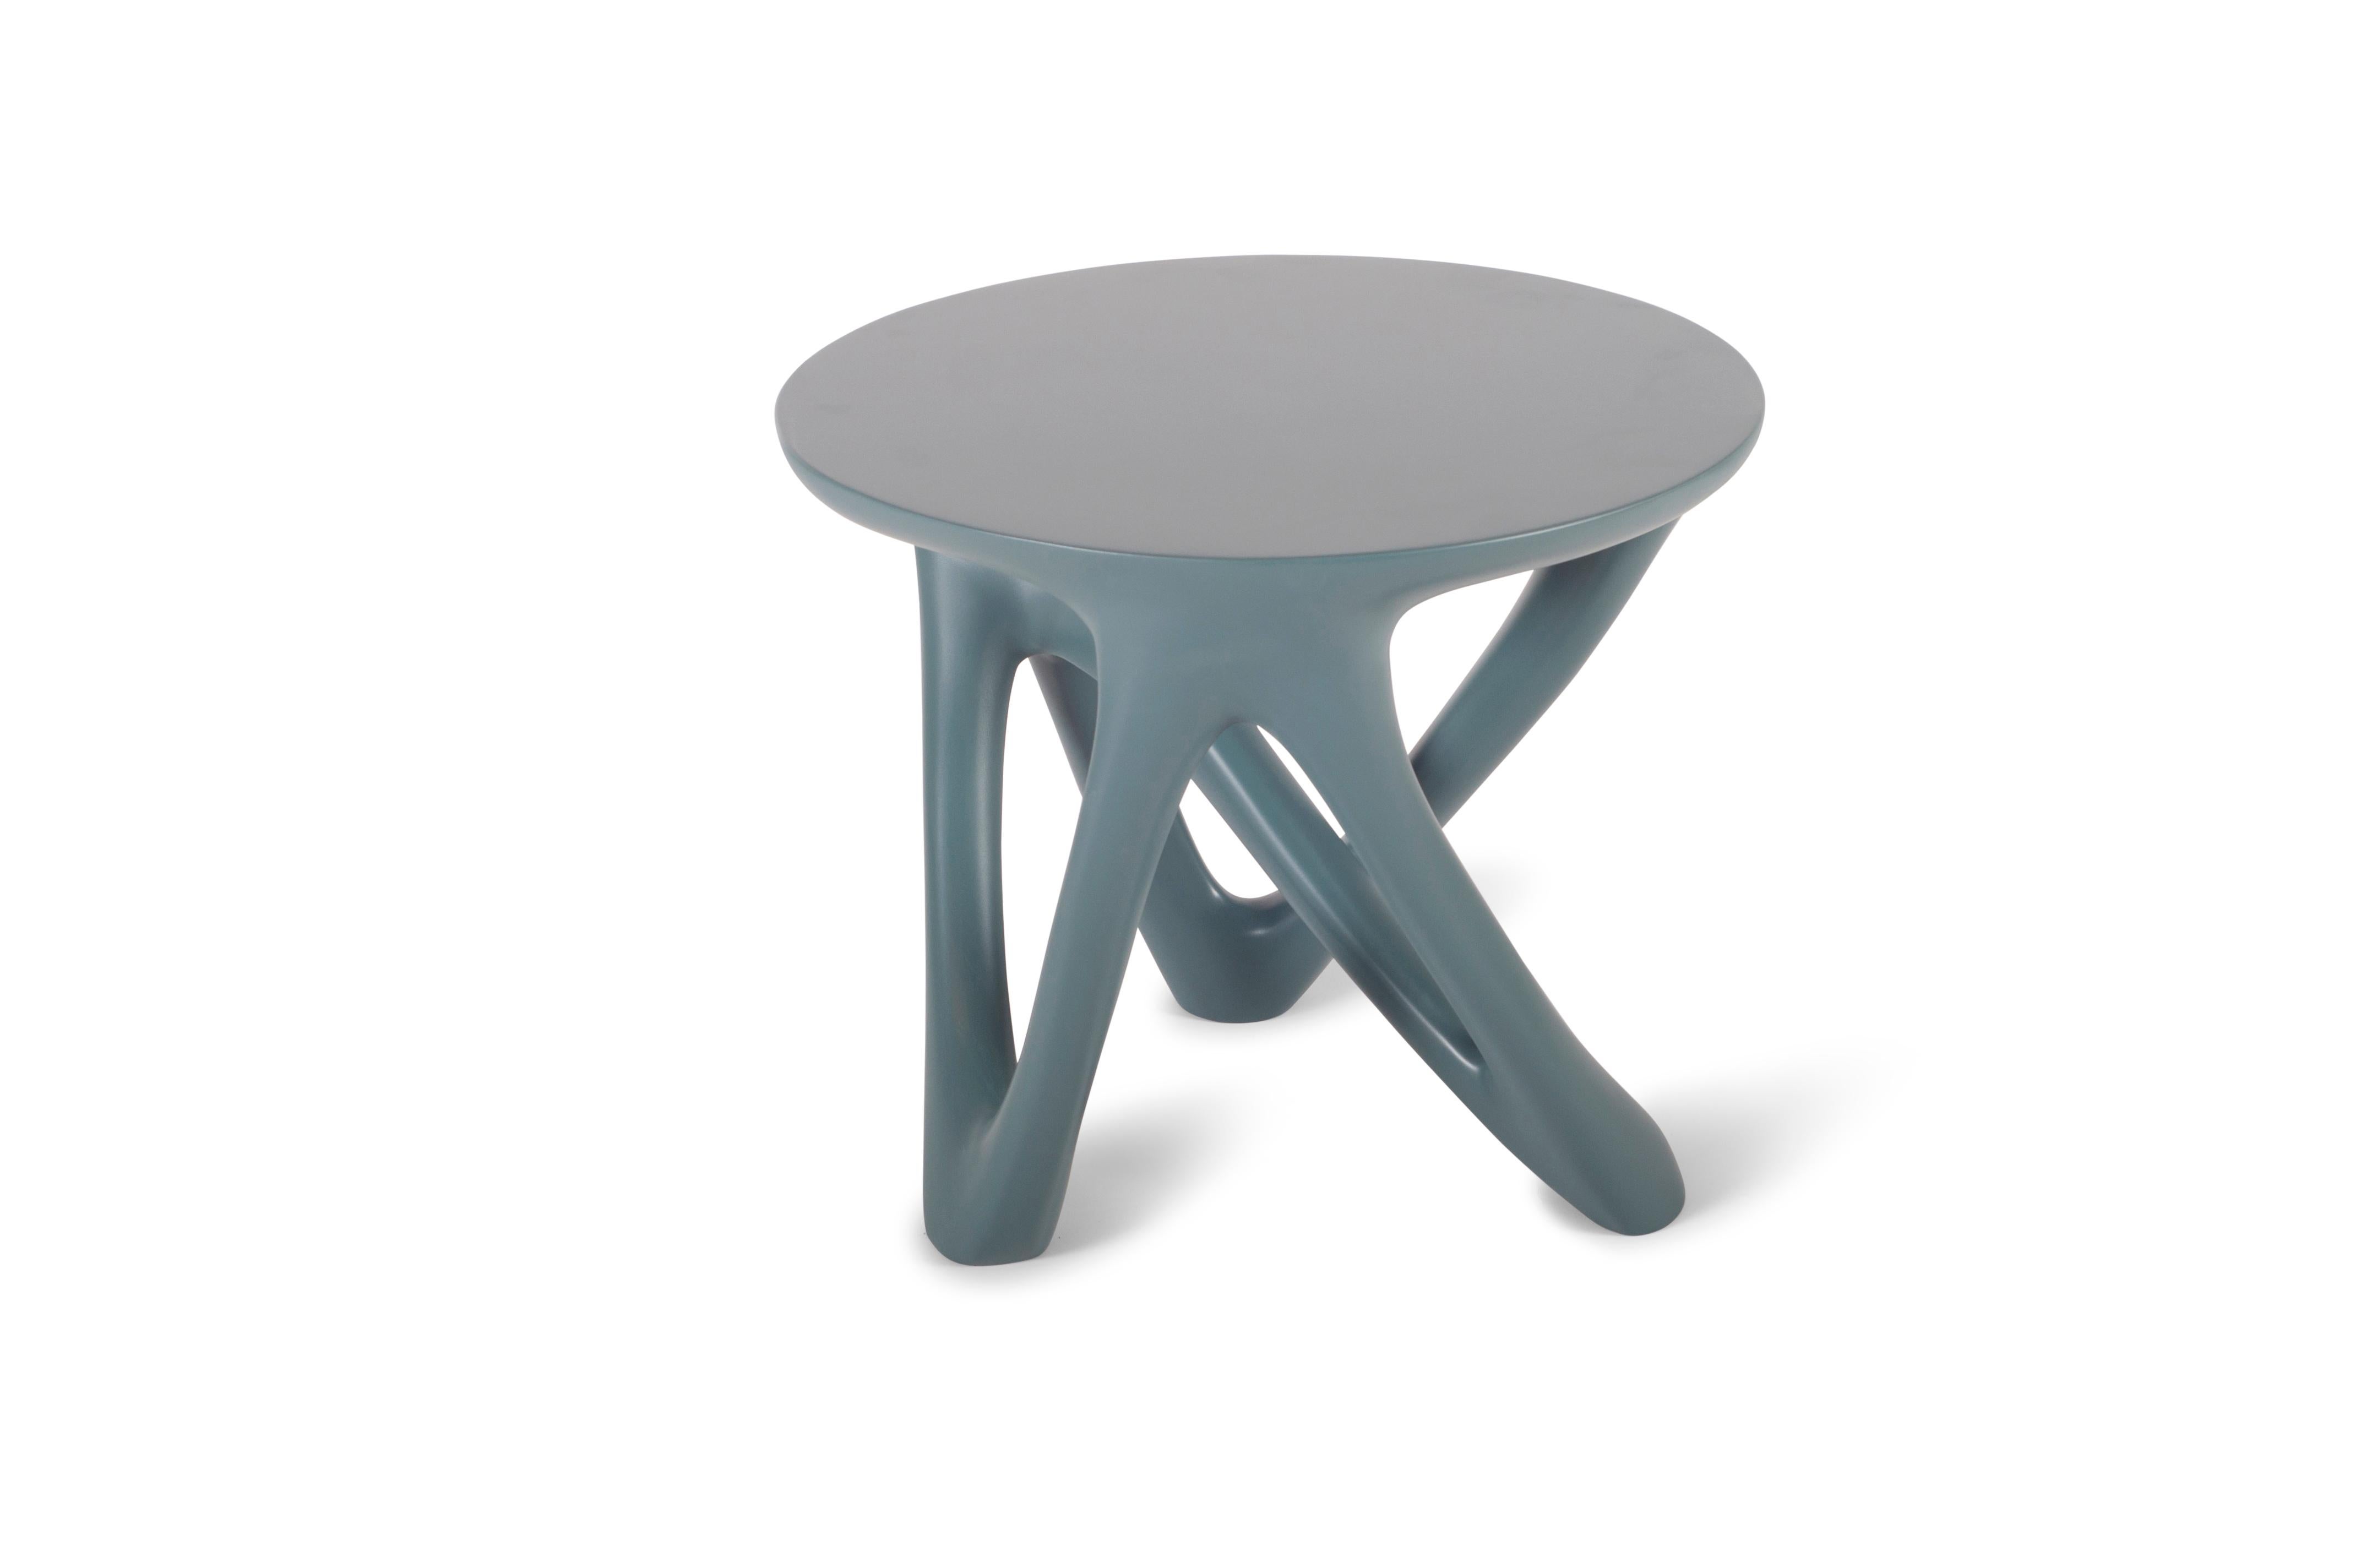 American Amorph Ya Modern Side Table in Gray lacquer finish For Sale